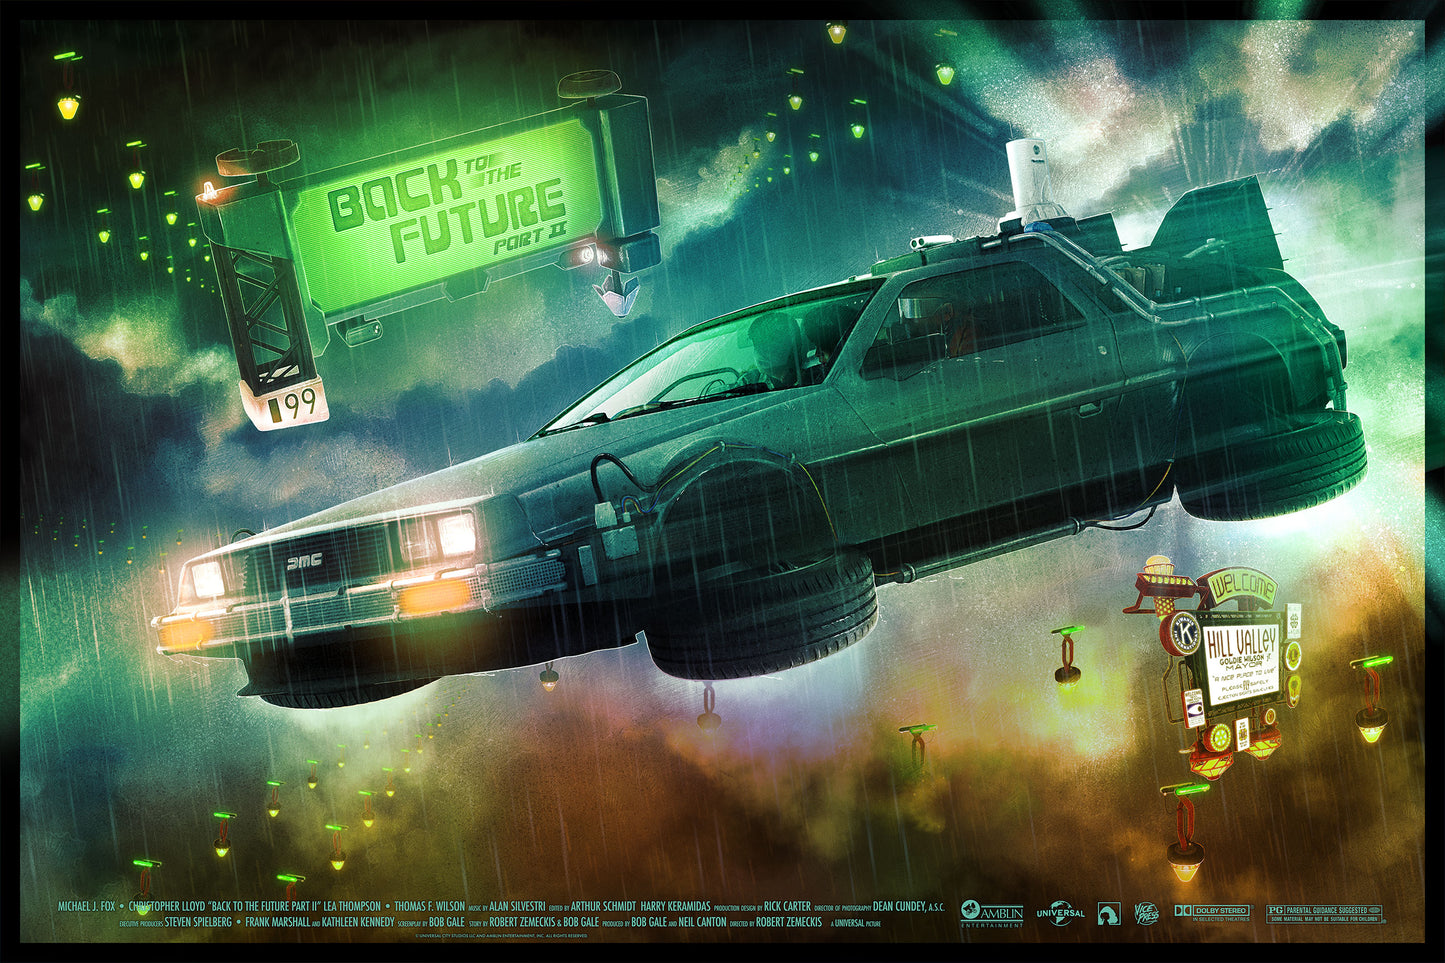 Kevin Wilson "Back to the Future: Part II" Variant